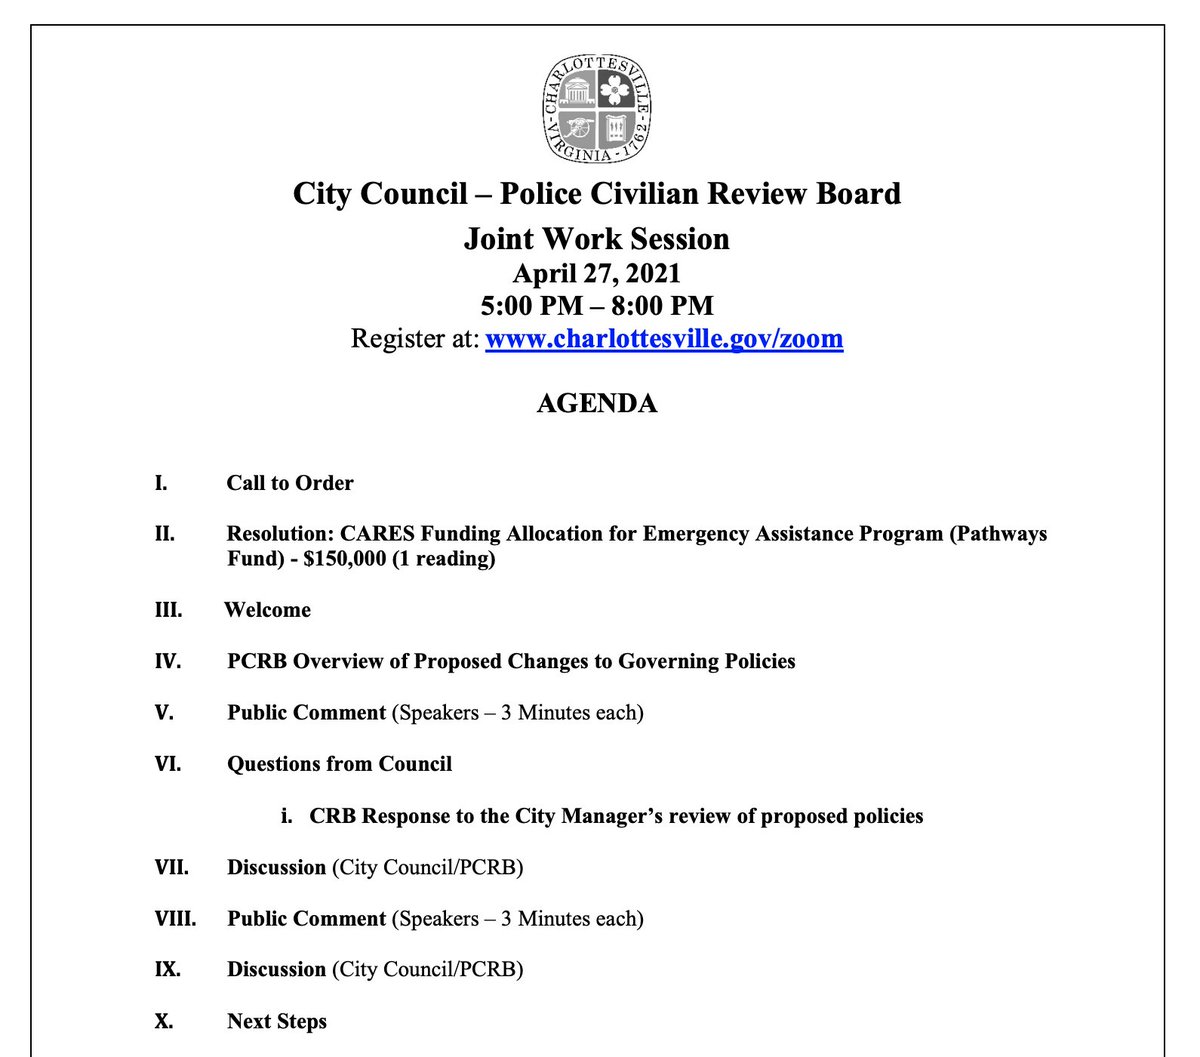 charlottesville city council is having a joint session with the police civilian review board this evening. the full agenda packet is online here:  https://www.facebook.com/profile.php?id=100007166076546&comment_id=Y29tbWVudDoxMDE1NTU5OTkxNzIwNDE2MV8xMDE1NTYwNjY1OTM2NDE2MQ%3D%3D